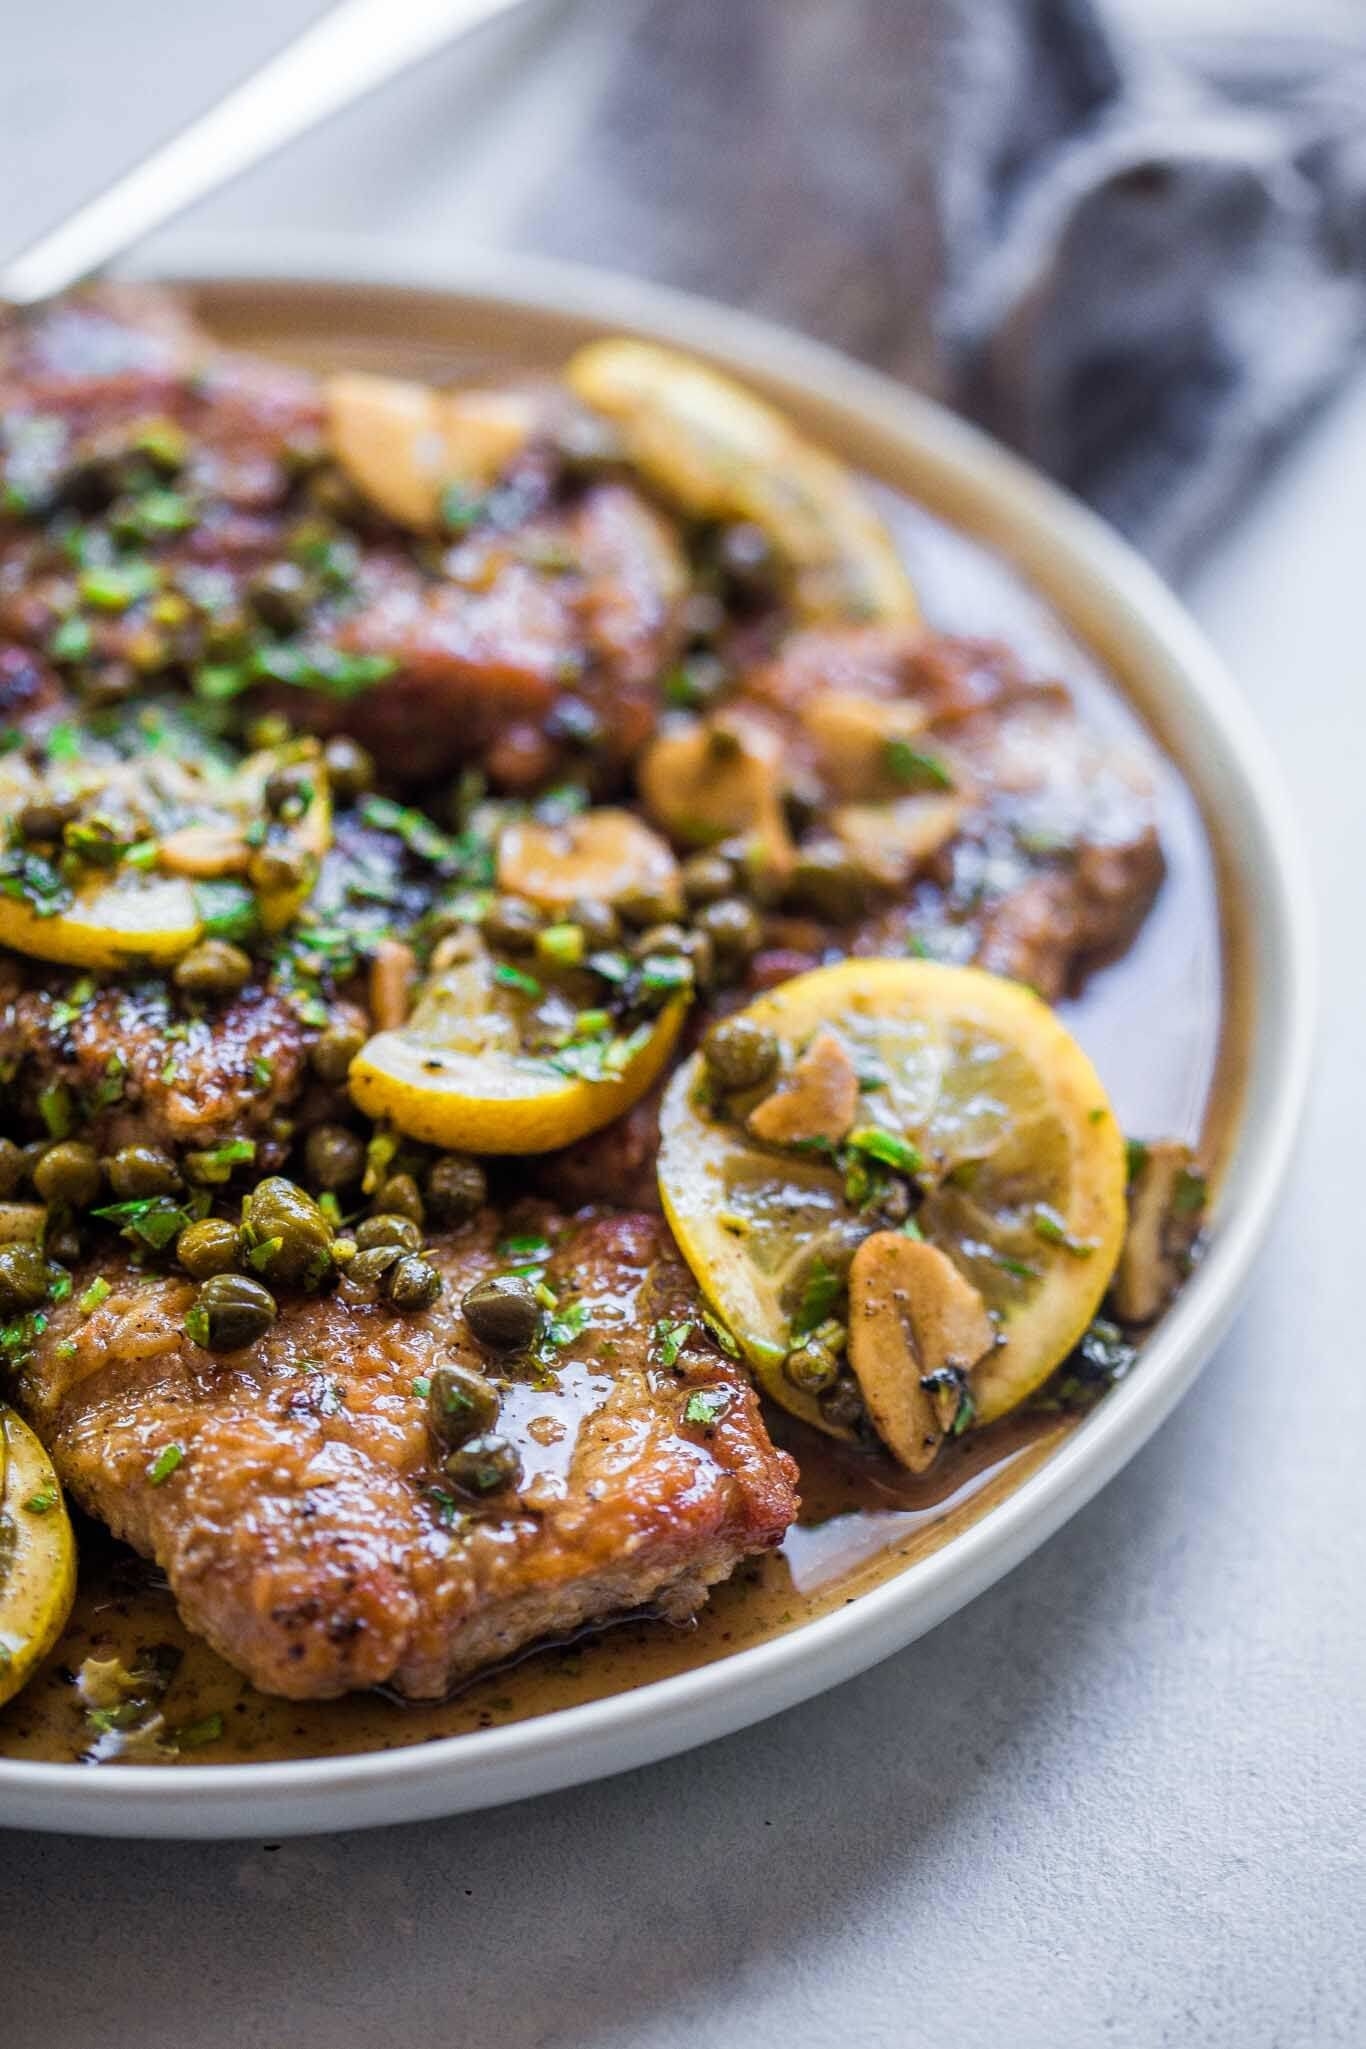 A plate of pork piccata in lemon butter sauce with capers